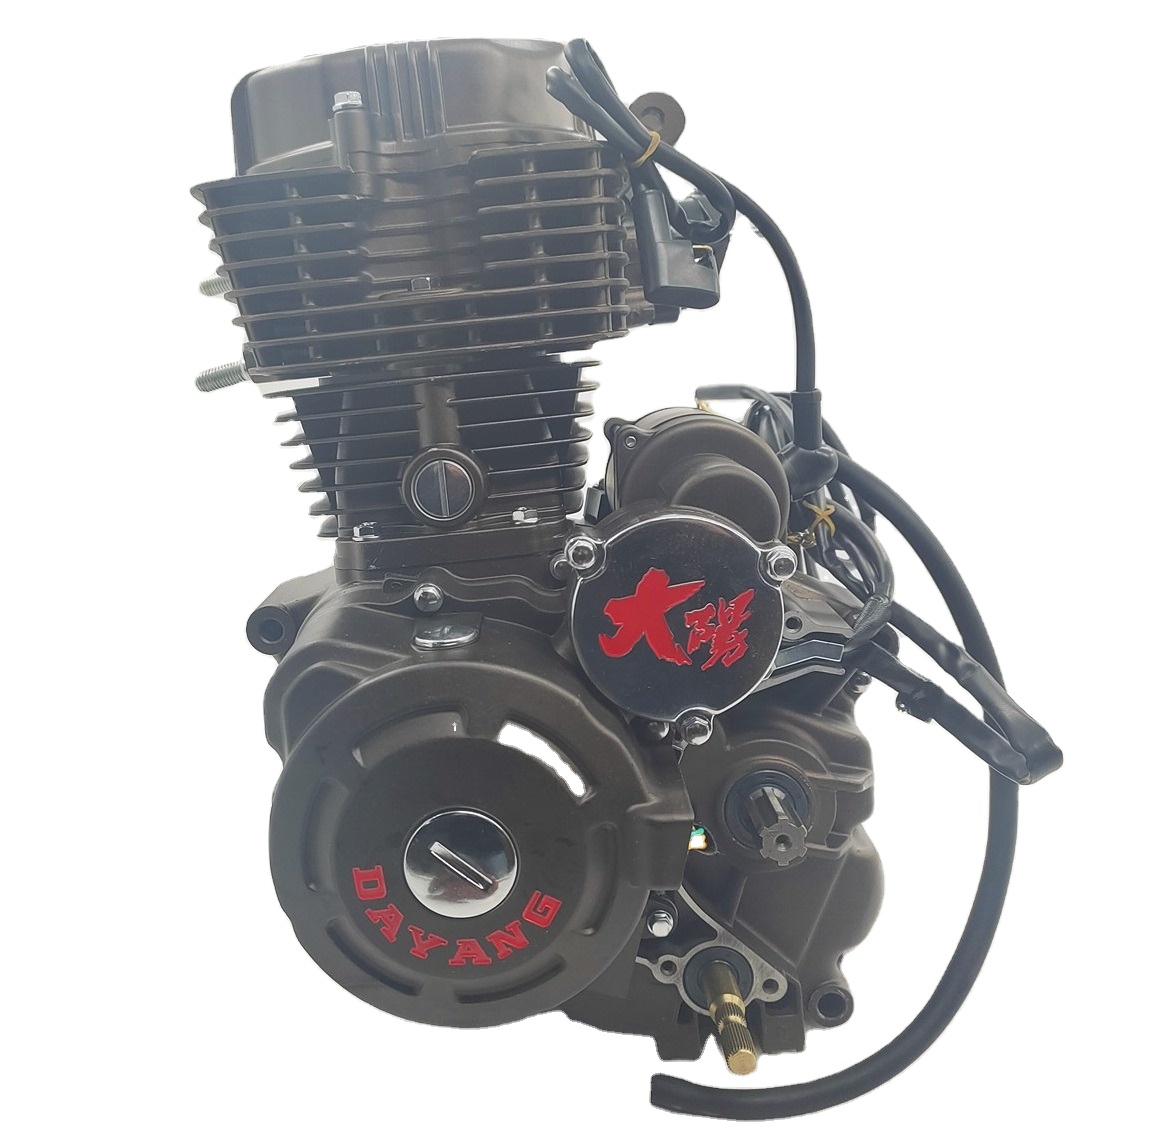 DAYANG CG200 air-cooled LIFAN  Chinese three wheels Motorcycle Engines tricycle engines assembly one cylinder fout stroke engine